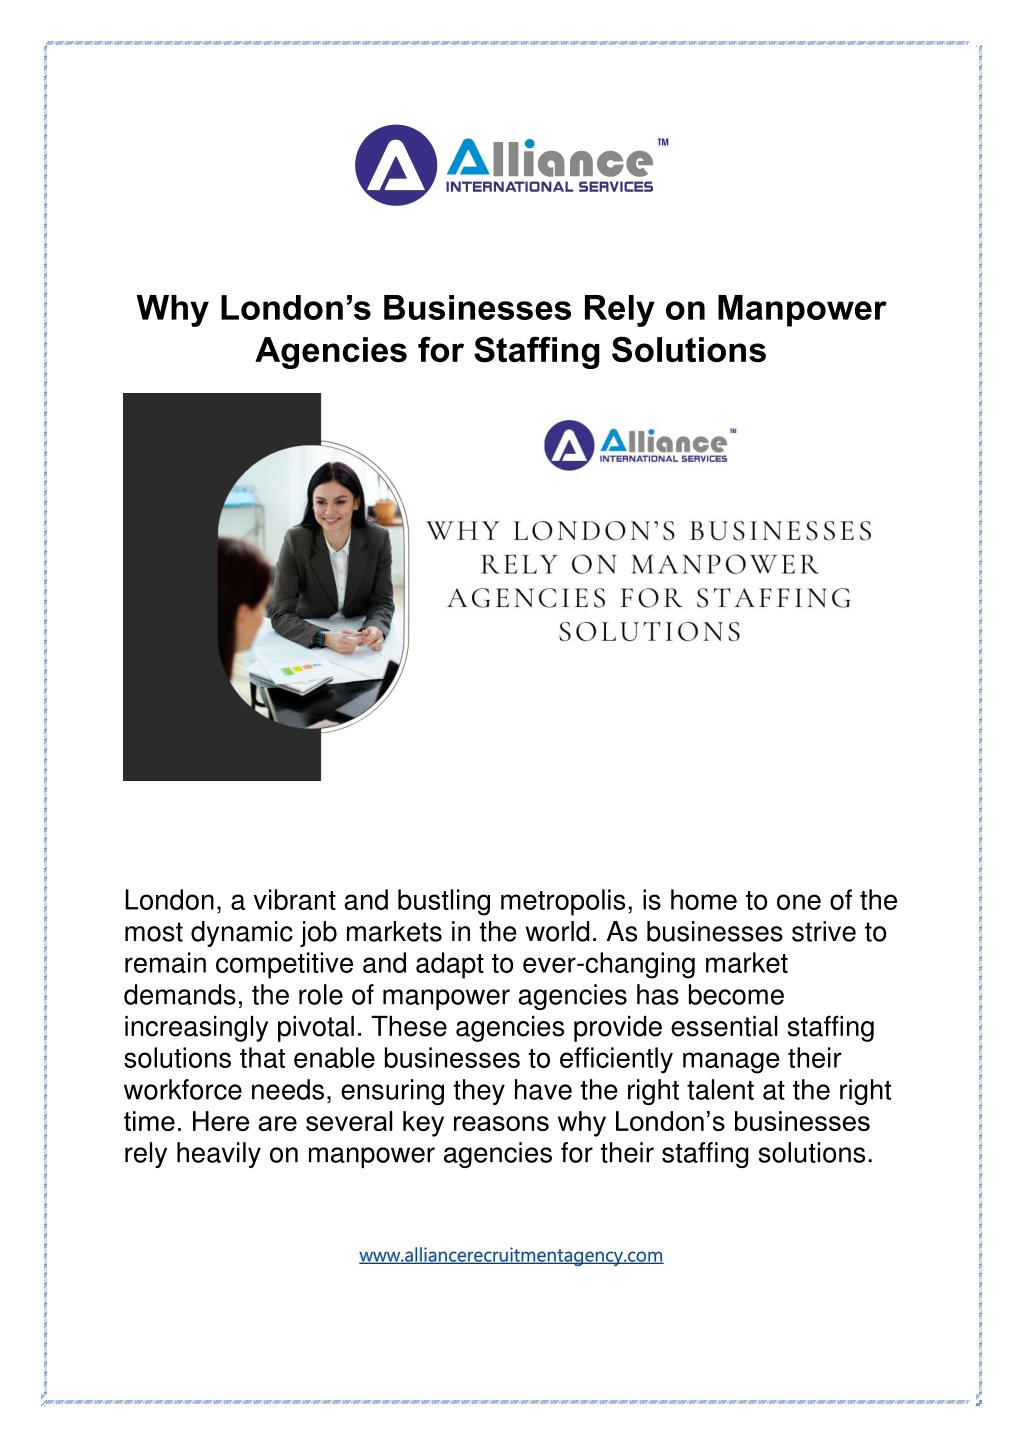 why london s businesses rely on manpower agencies l.w